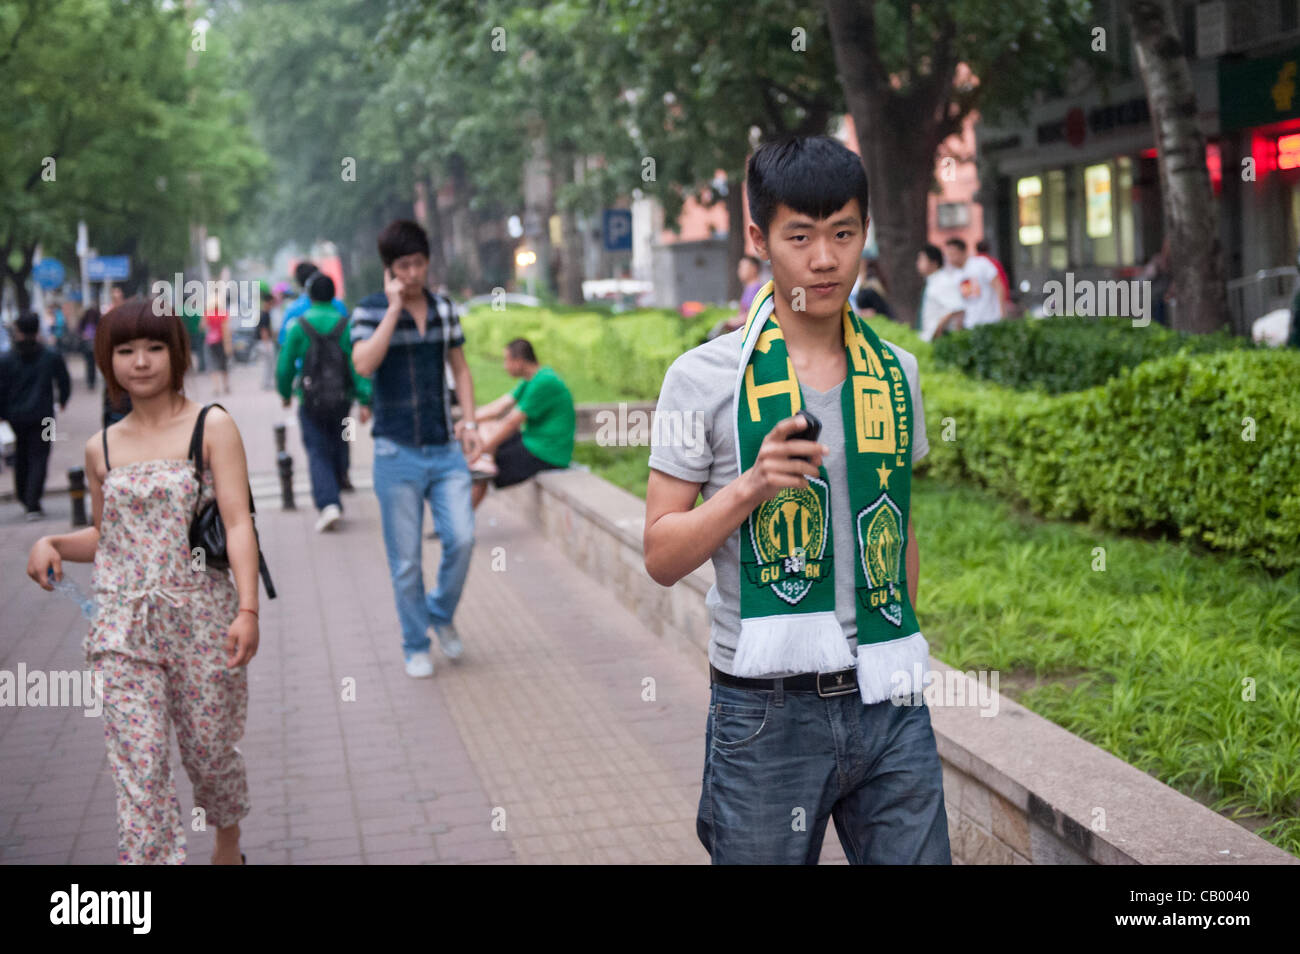 Supporter of Beijing Guoan on his way to the Workers' Stadium for the match between the Beijing Guoan and Guizhou Renhe football teams in Beijing, China, on Friday May 11, 2012. Beijing Guoan won the match with 2:1. Stock Photo